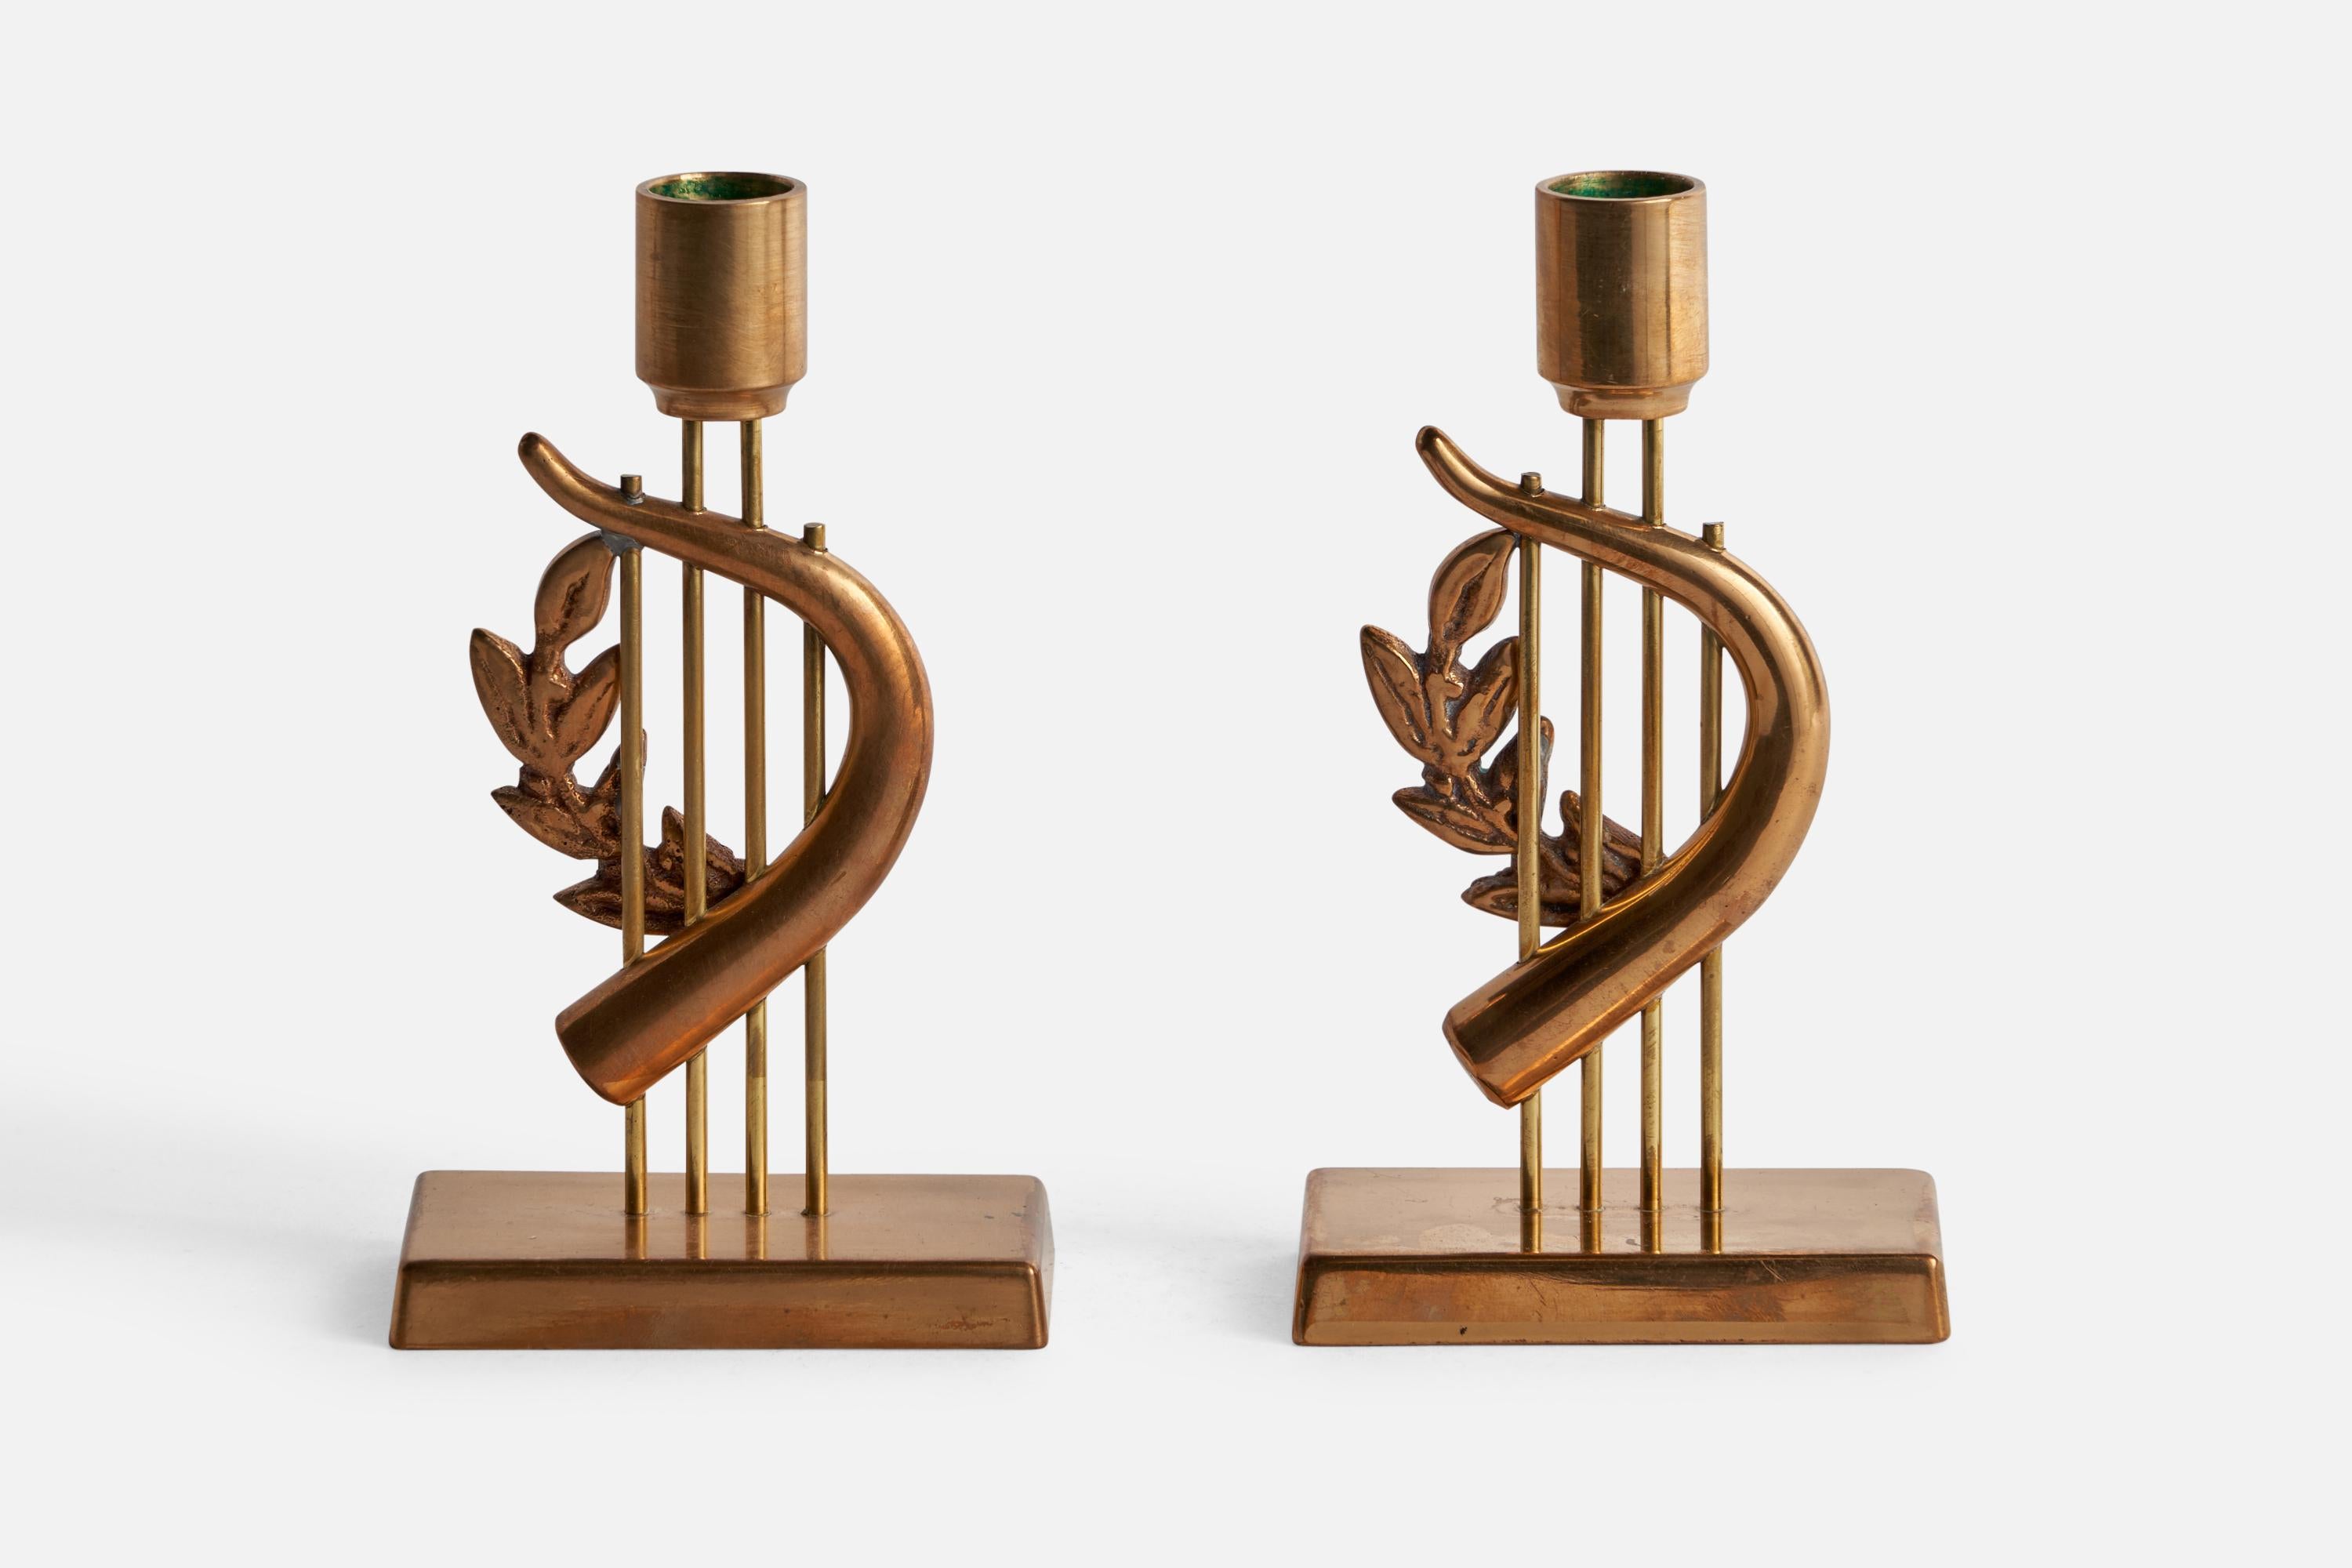 A pair of brass candlesticks designed and produced in Sweden. Impressed Design G. Magnusson and dated 1976.

Holds 0.65” diameter candles